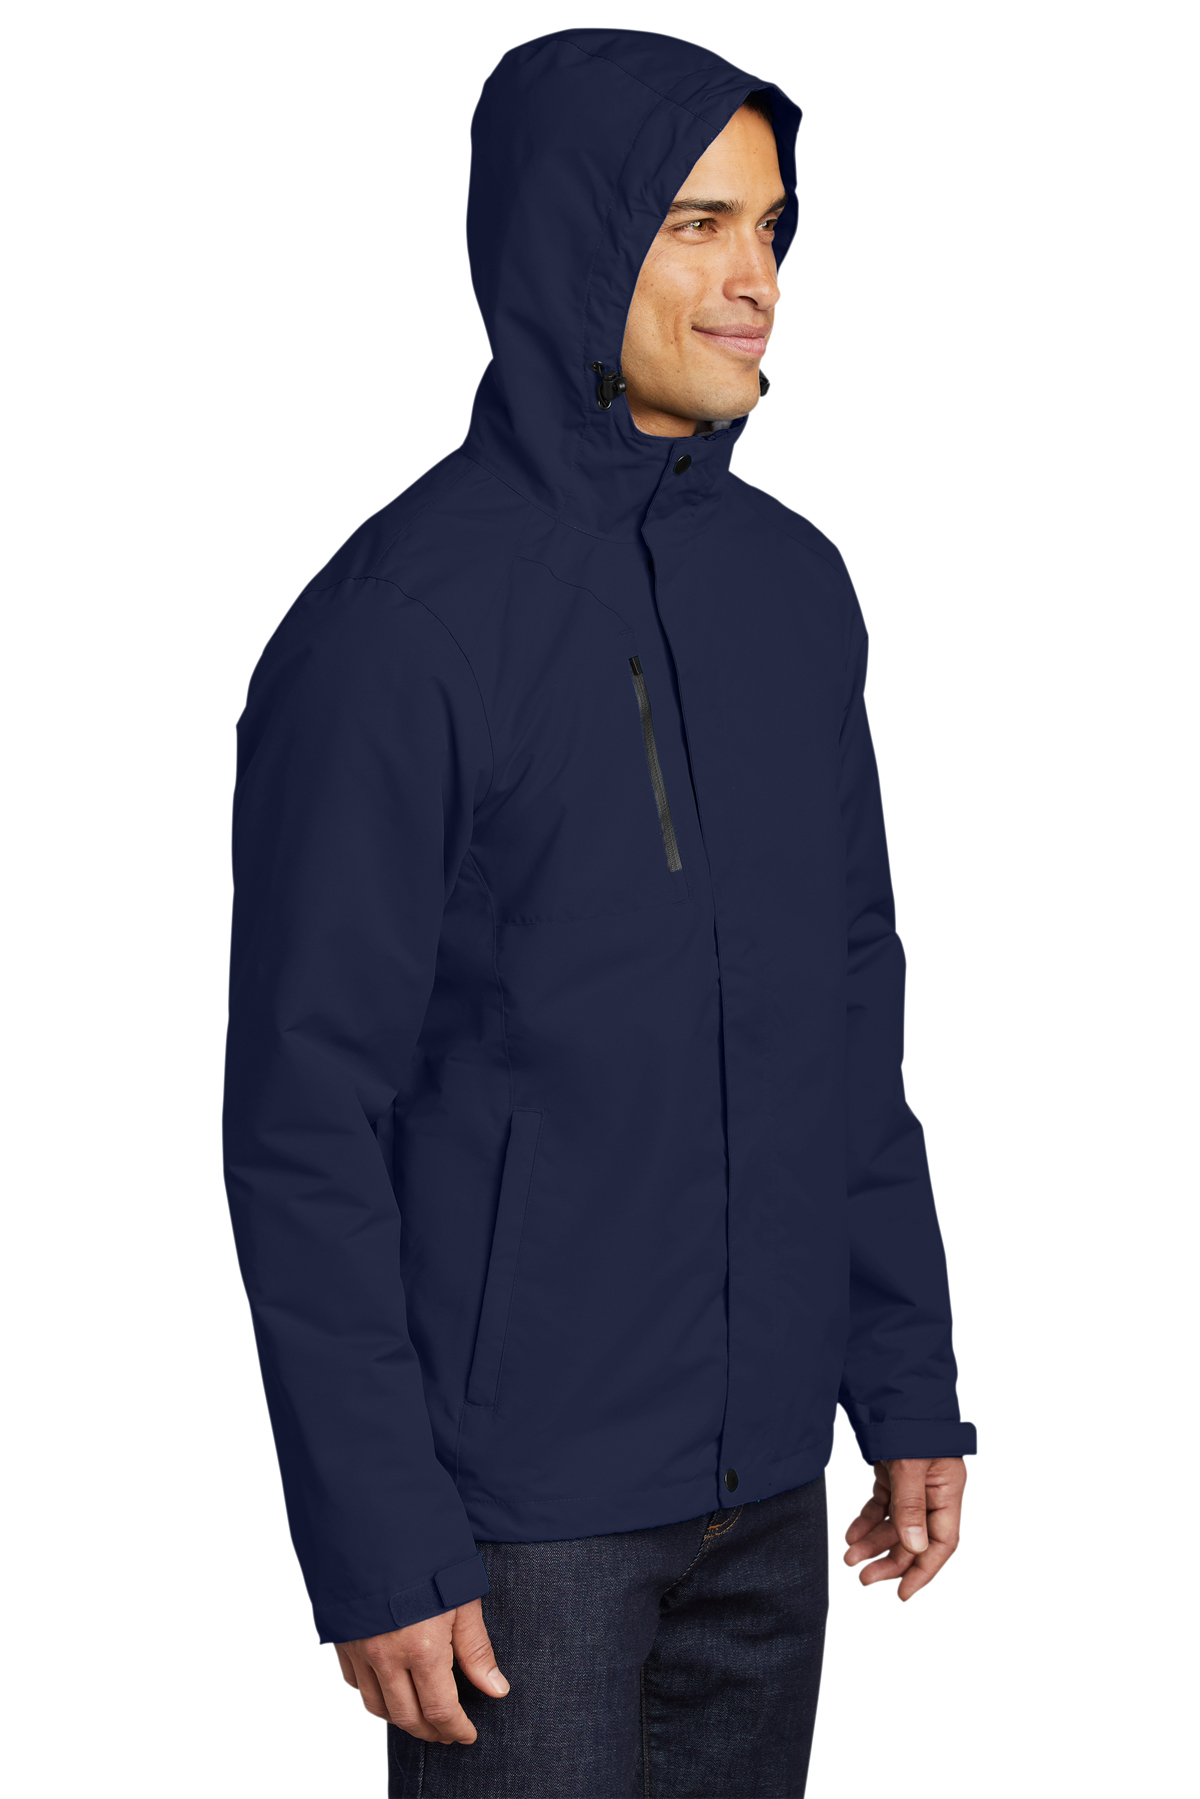 Port Authority All-Conditions Jacket | Product | Port Authority